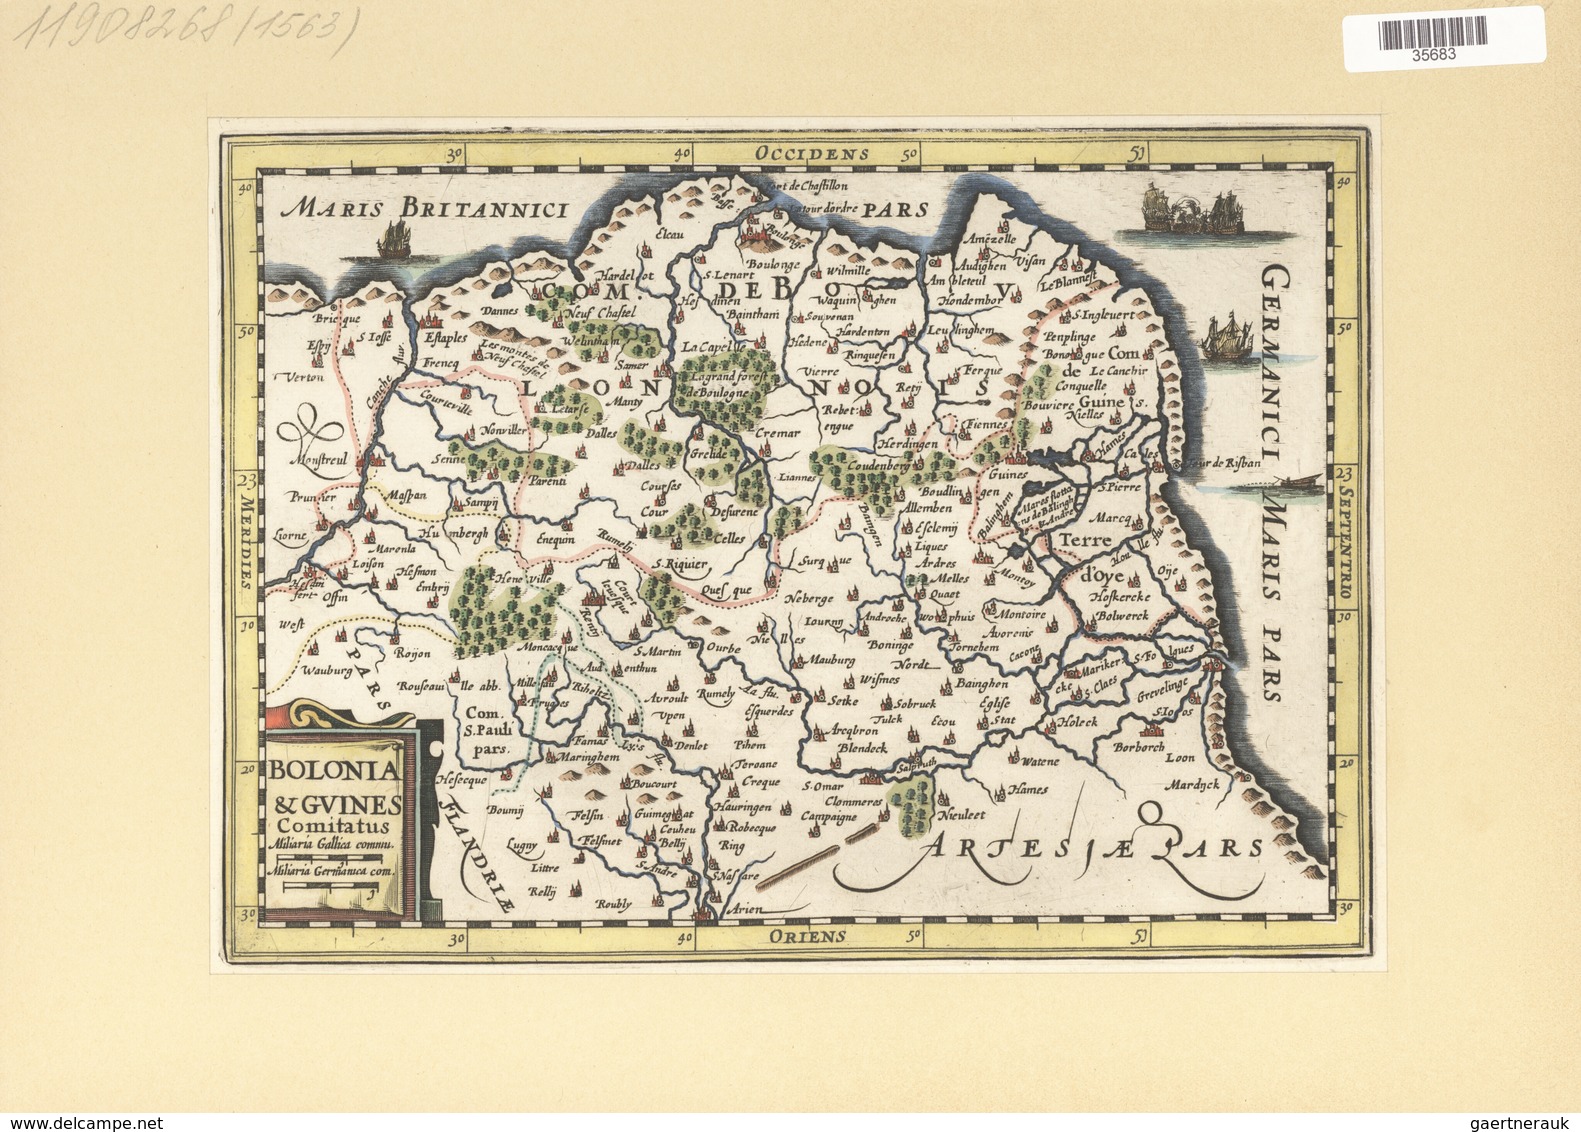 Landkarten Und Stiche: 1734. Map Of Boulogne And Calais Region Of France. From The Mercator Atlas Mi - Géographie